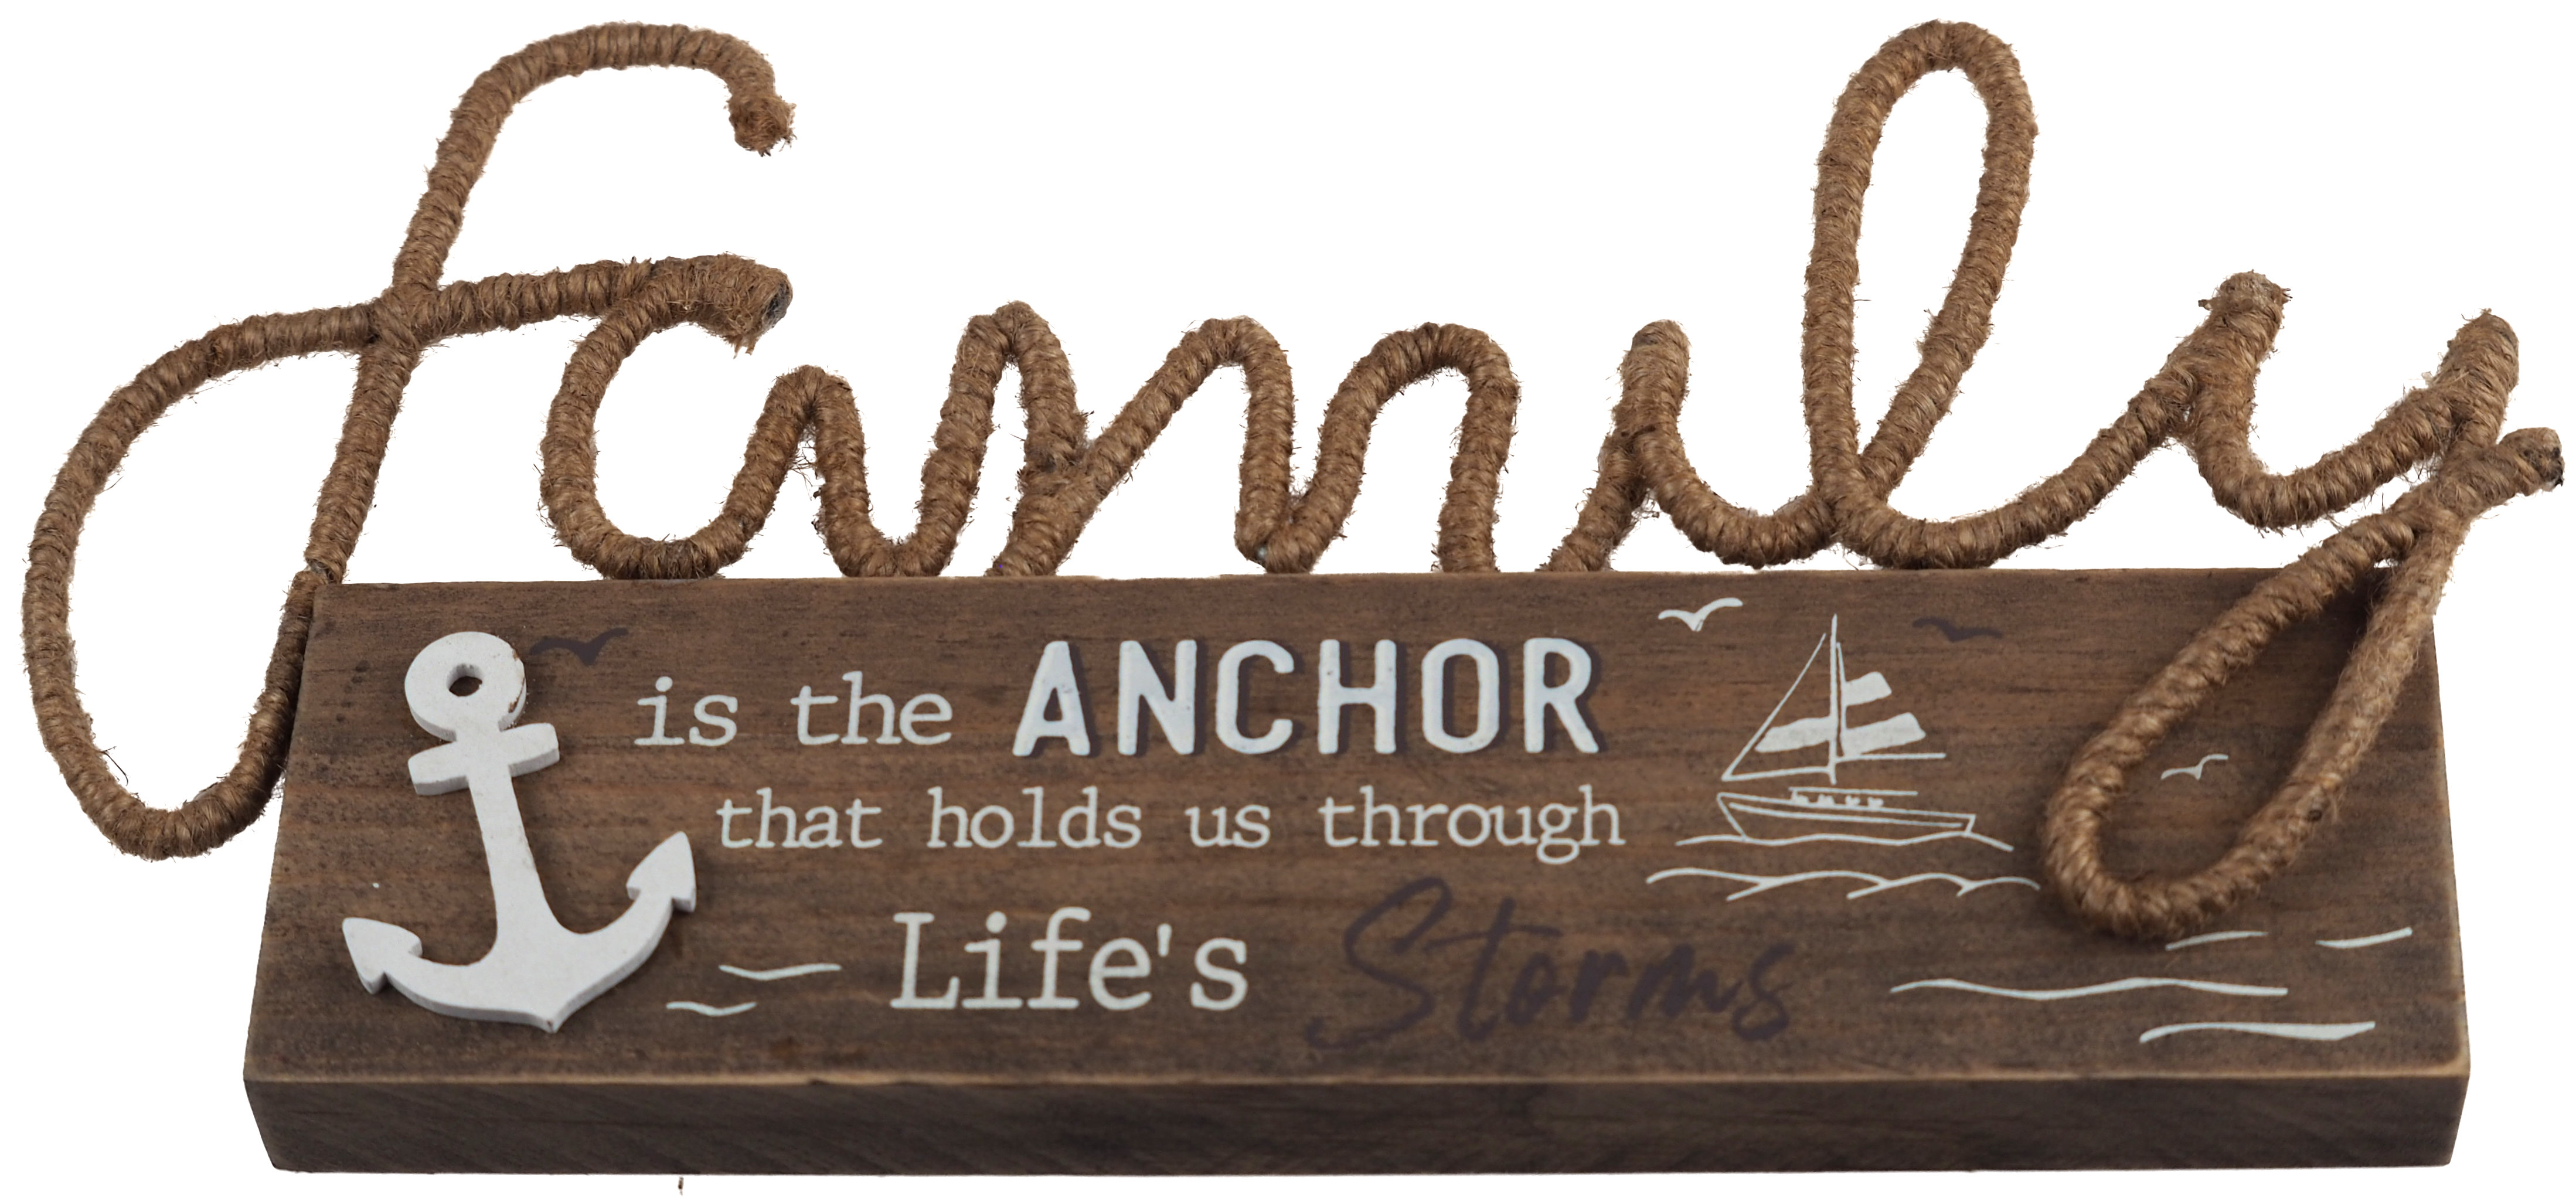 Family Quote Nautical Free Standing Plaque, Lifes Anchor Holds Us Through Storms